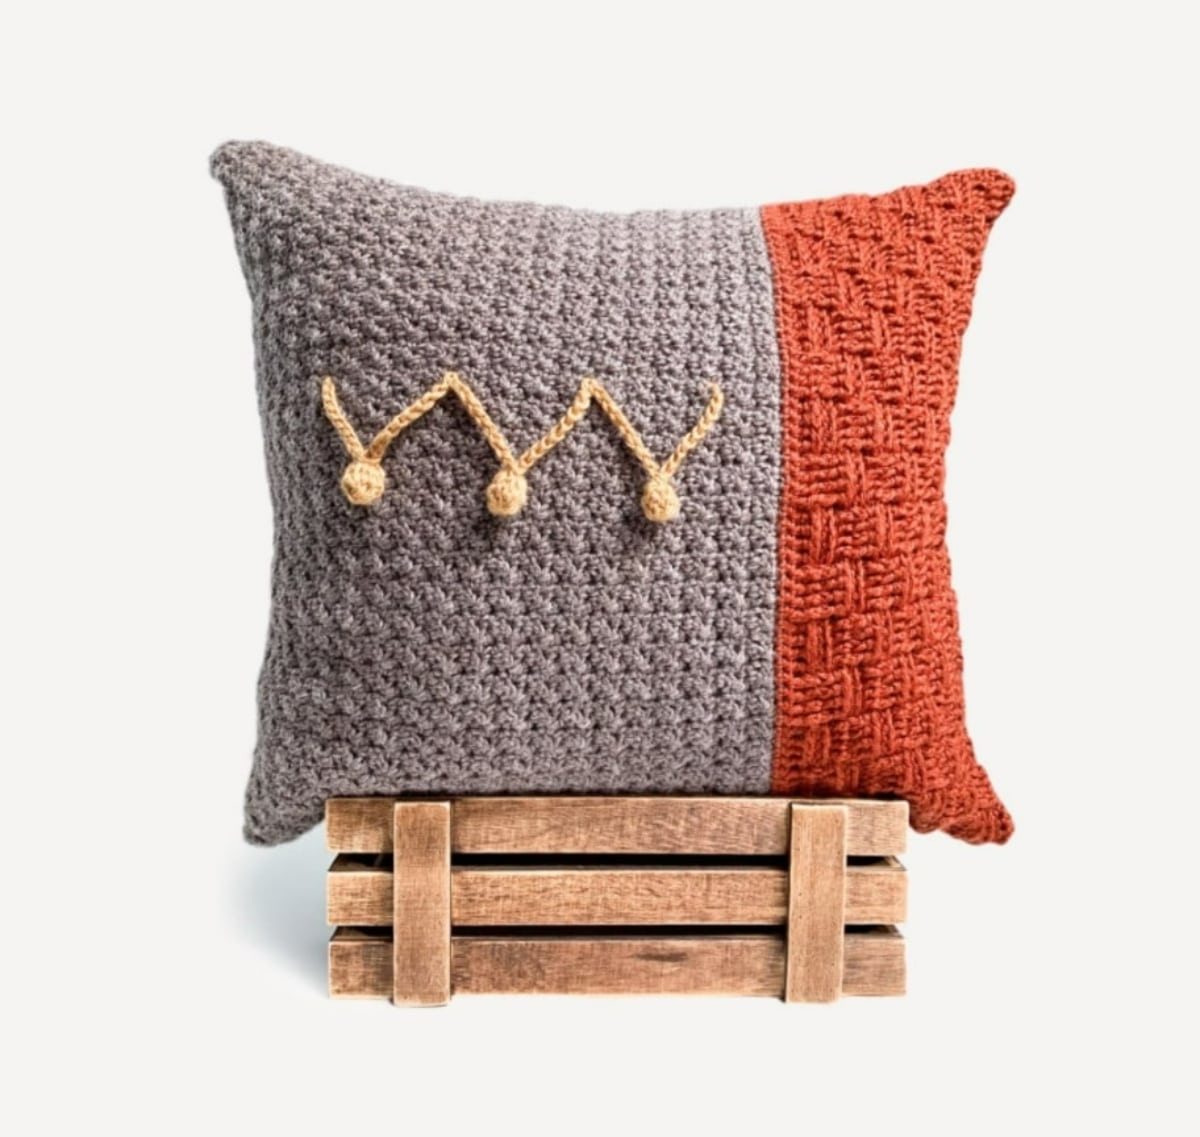 Gray crochet cushion sitting on a wooden box with one large red stripe and three golden bobbles with simple gold stitching in the center.